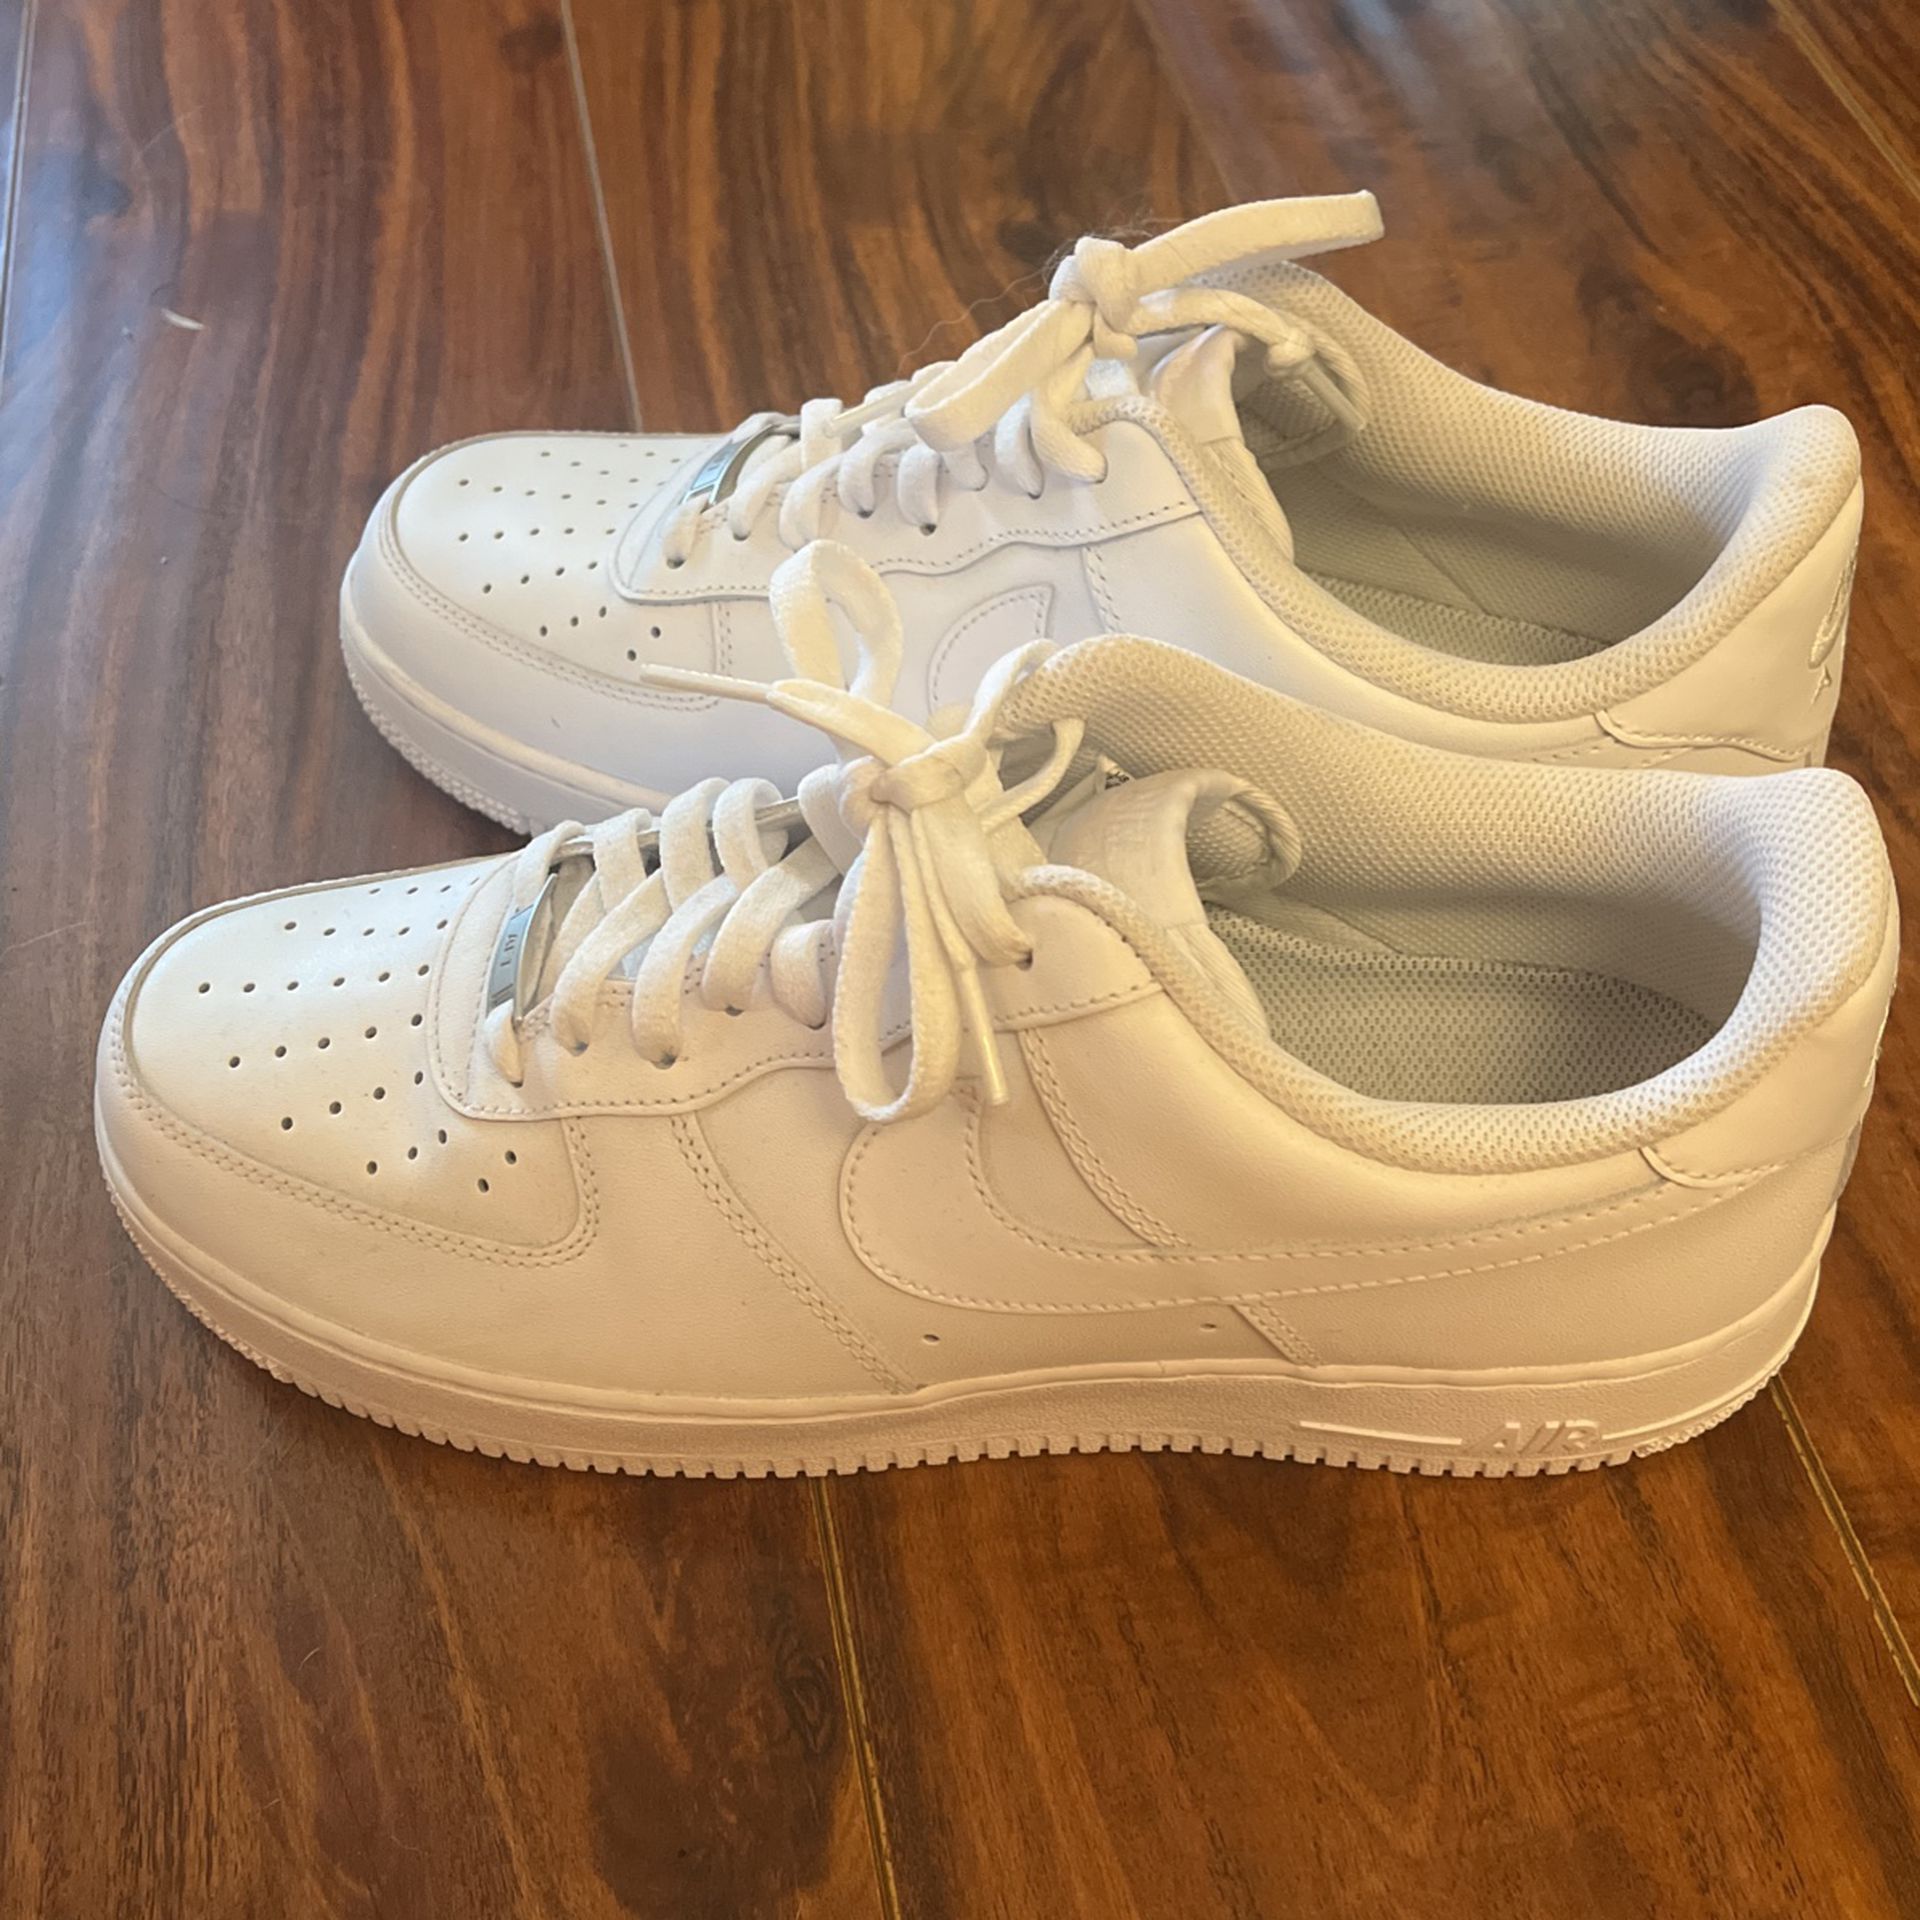 Nike Off White Air Force 1 “Moma” Size 11 Men for Sale in Bonita, CA